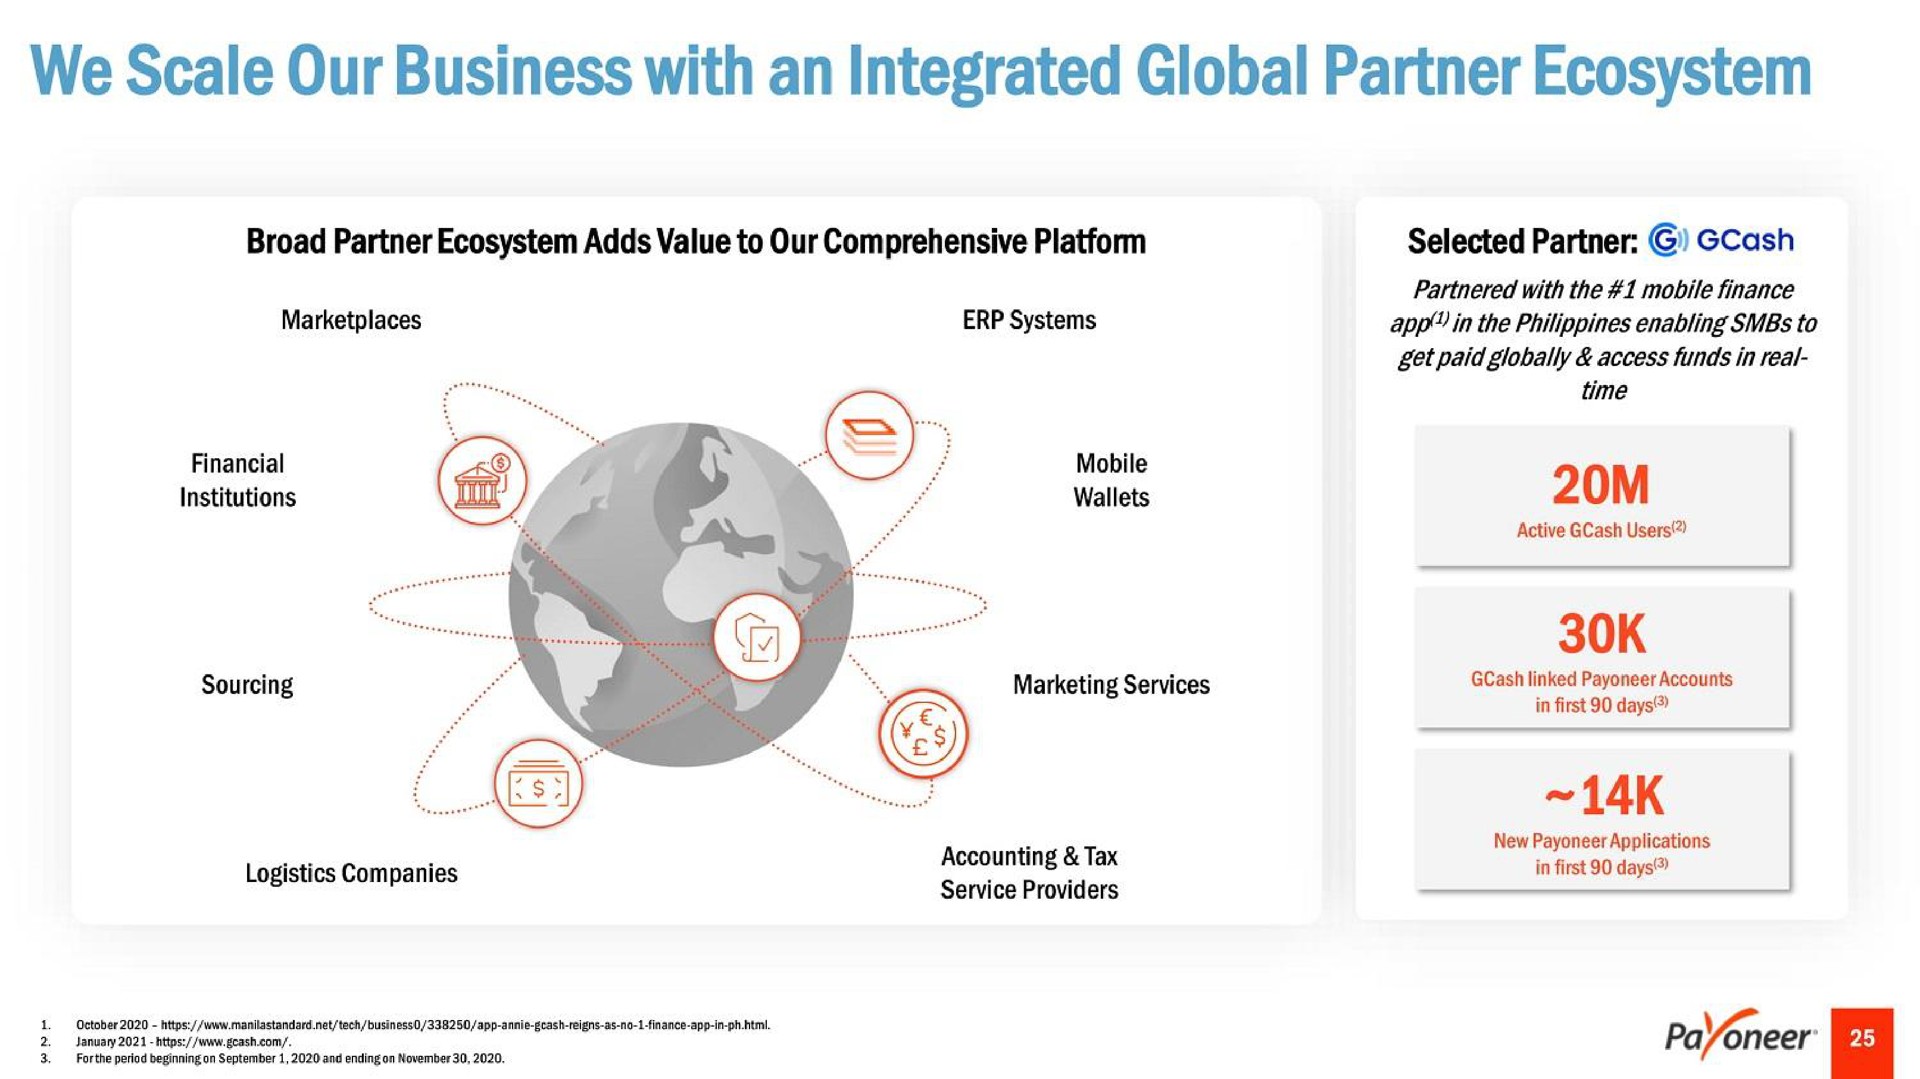 we scale our business with an integrated global partner ecosystem | Payoneer